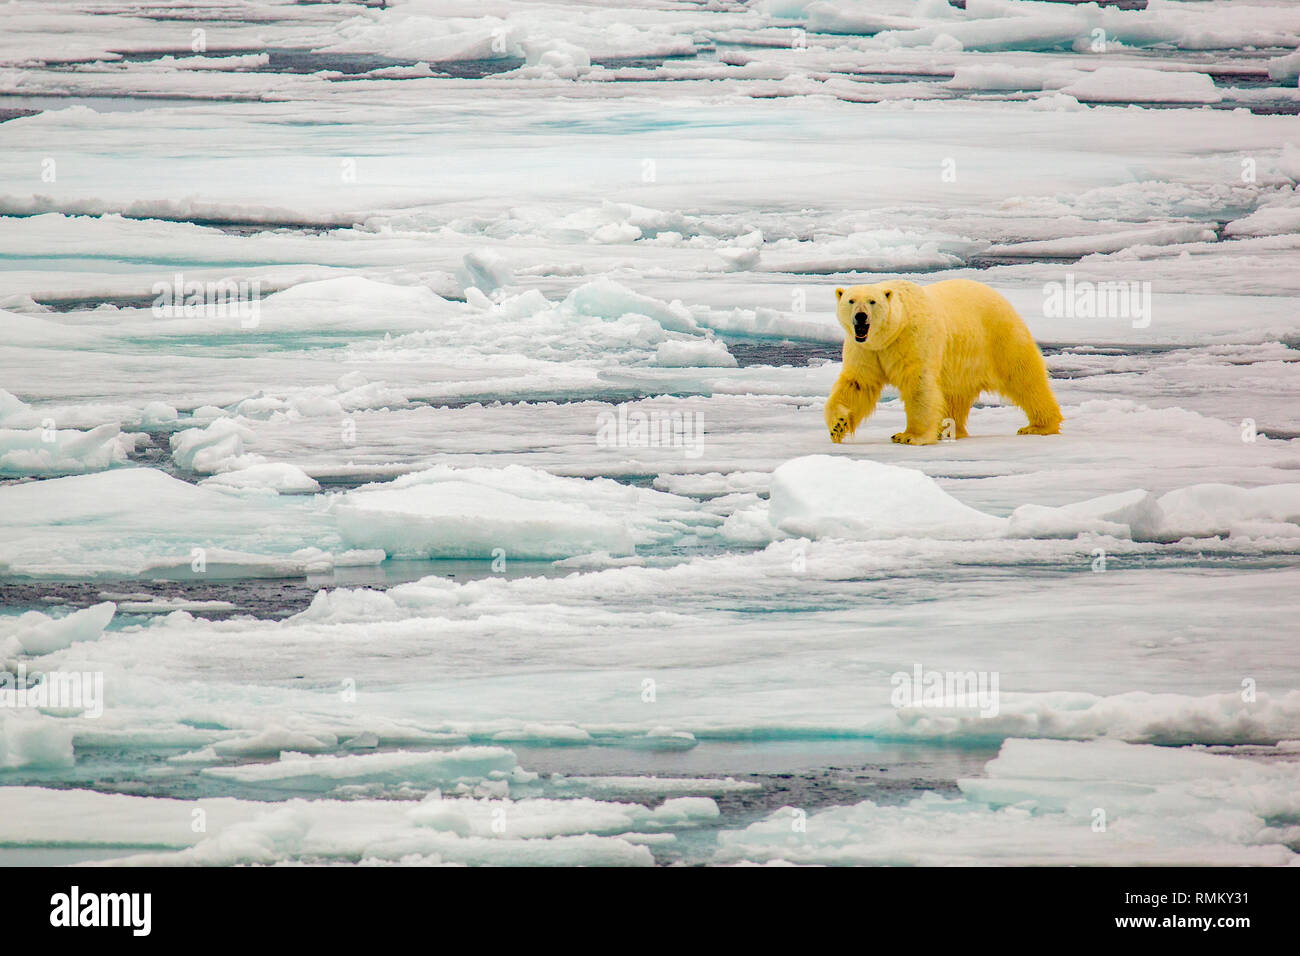 A Polar Bear (Ursus maritimus) hunting seals on rotten sea ice off the north coast of Spitsbergen, Svalbard only 500 miles from the North Pole. Climat Stock Photo